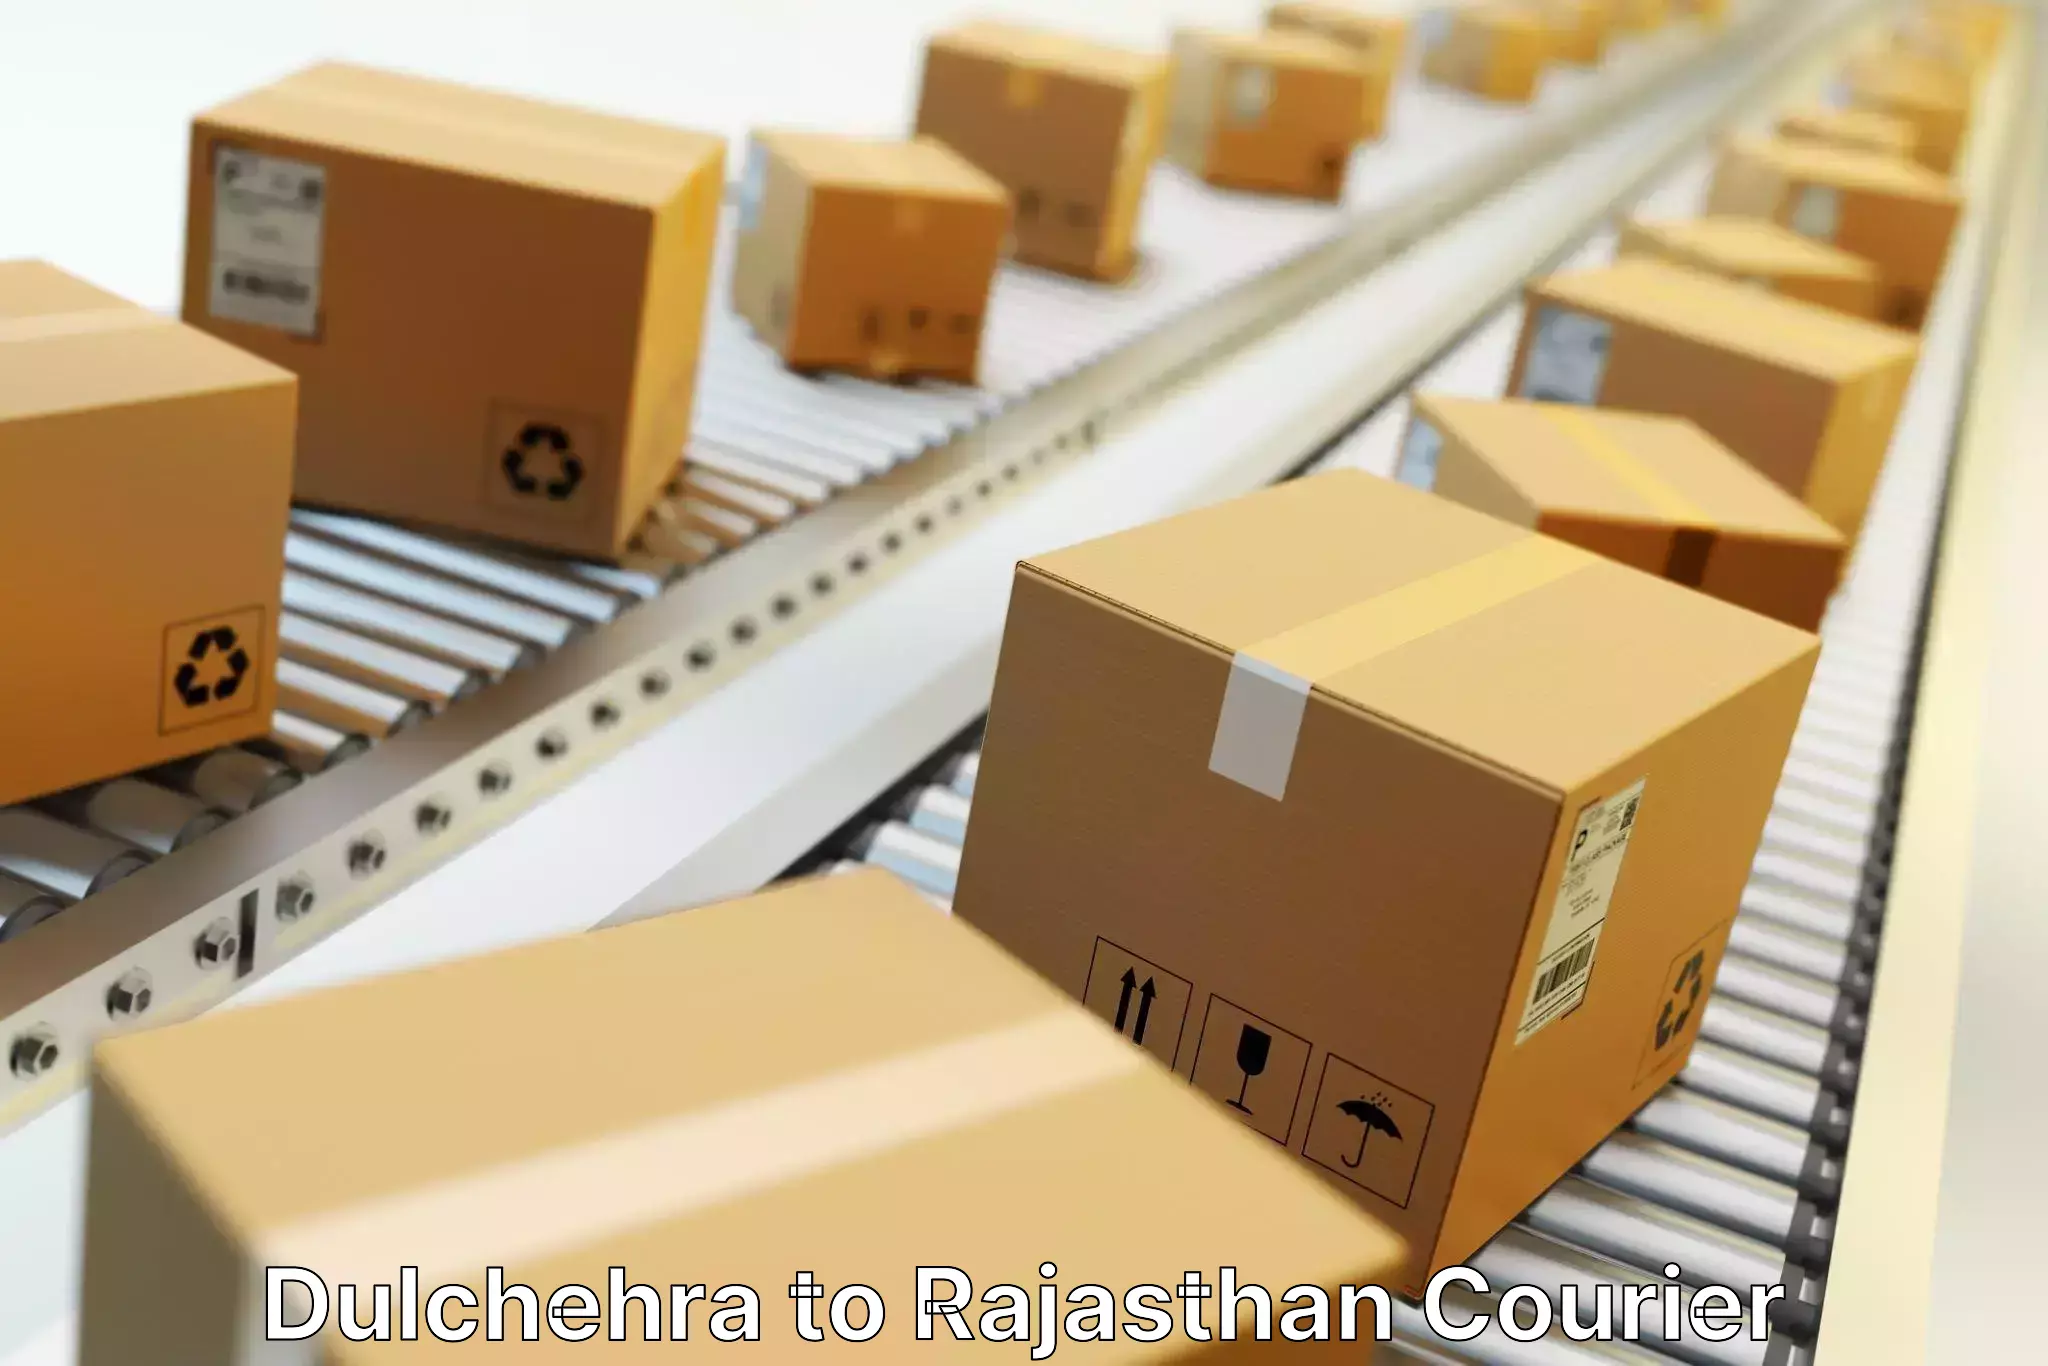 Express package handling in Dulchehra to Piparcity